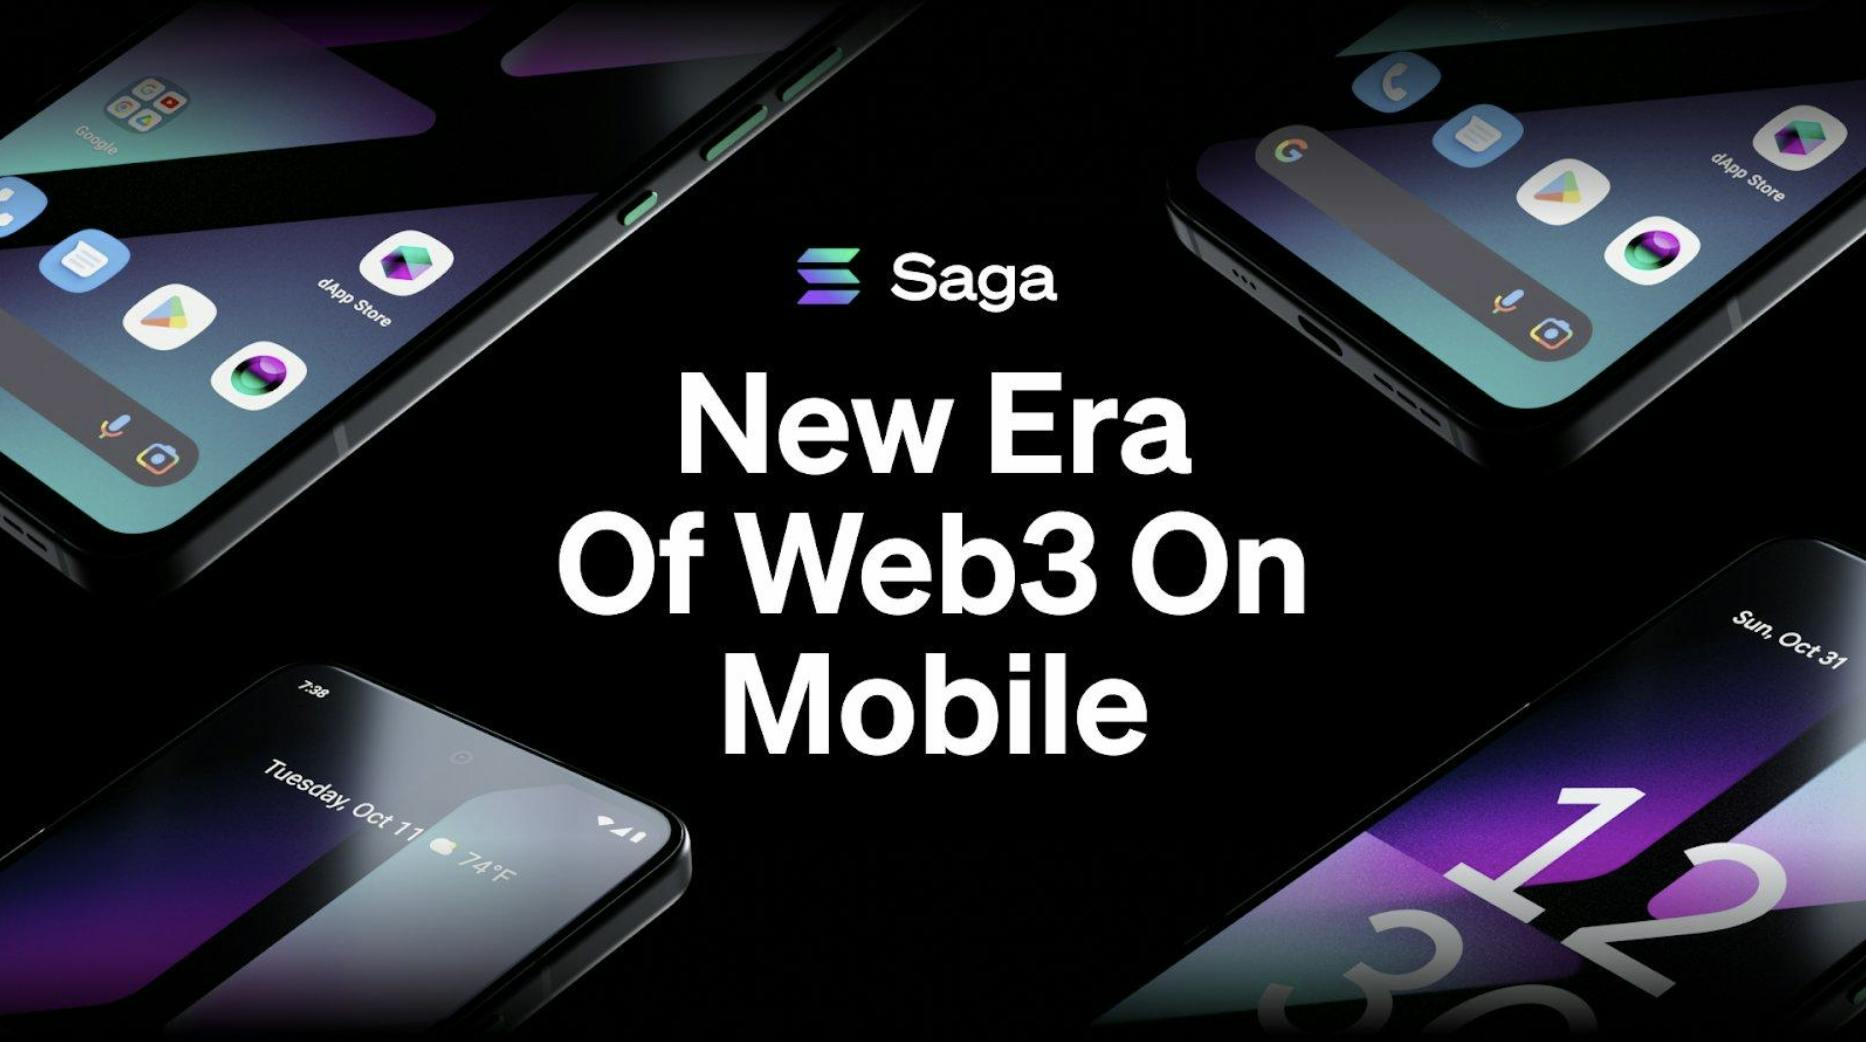 The first Web3 phone is here